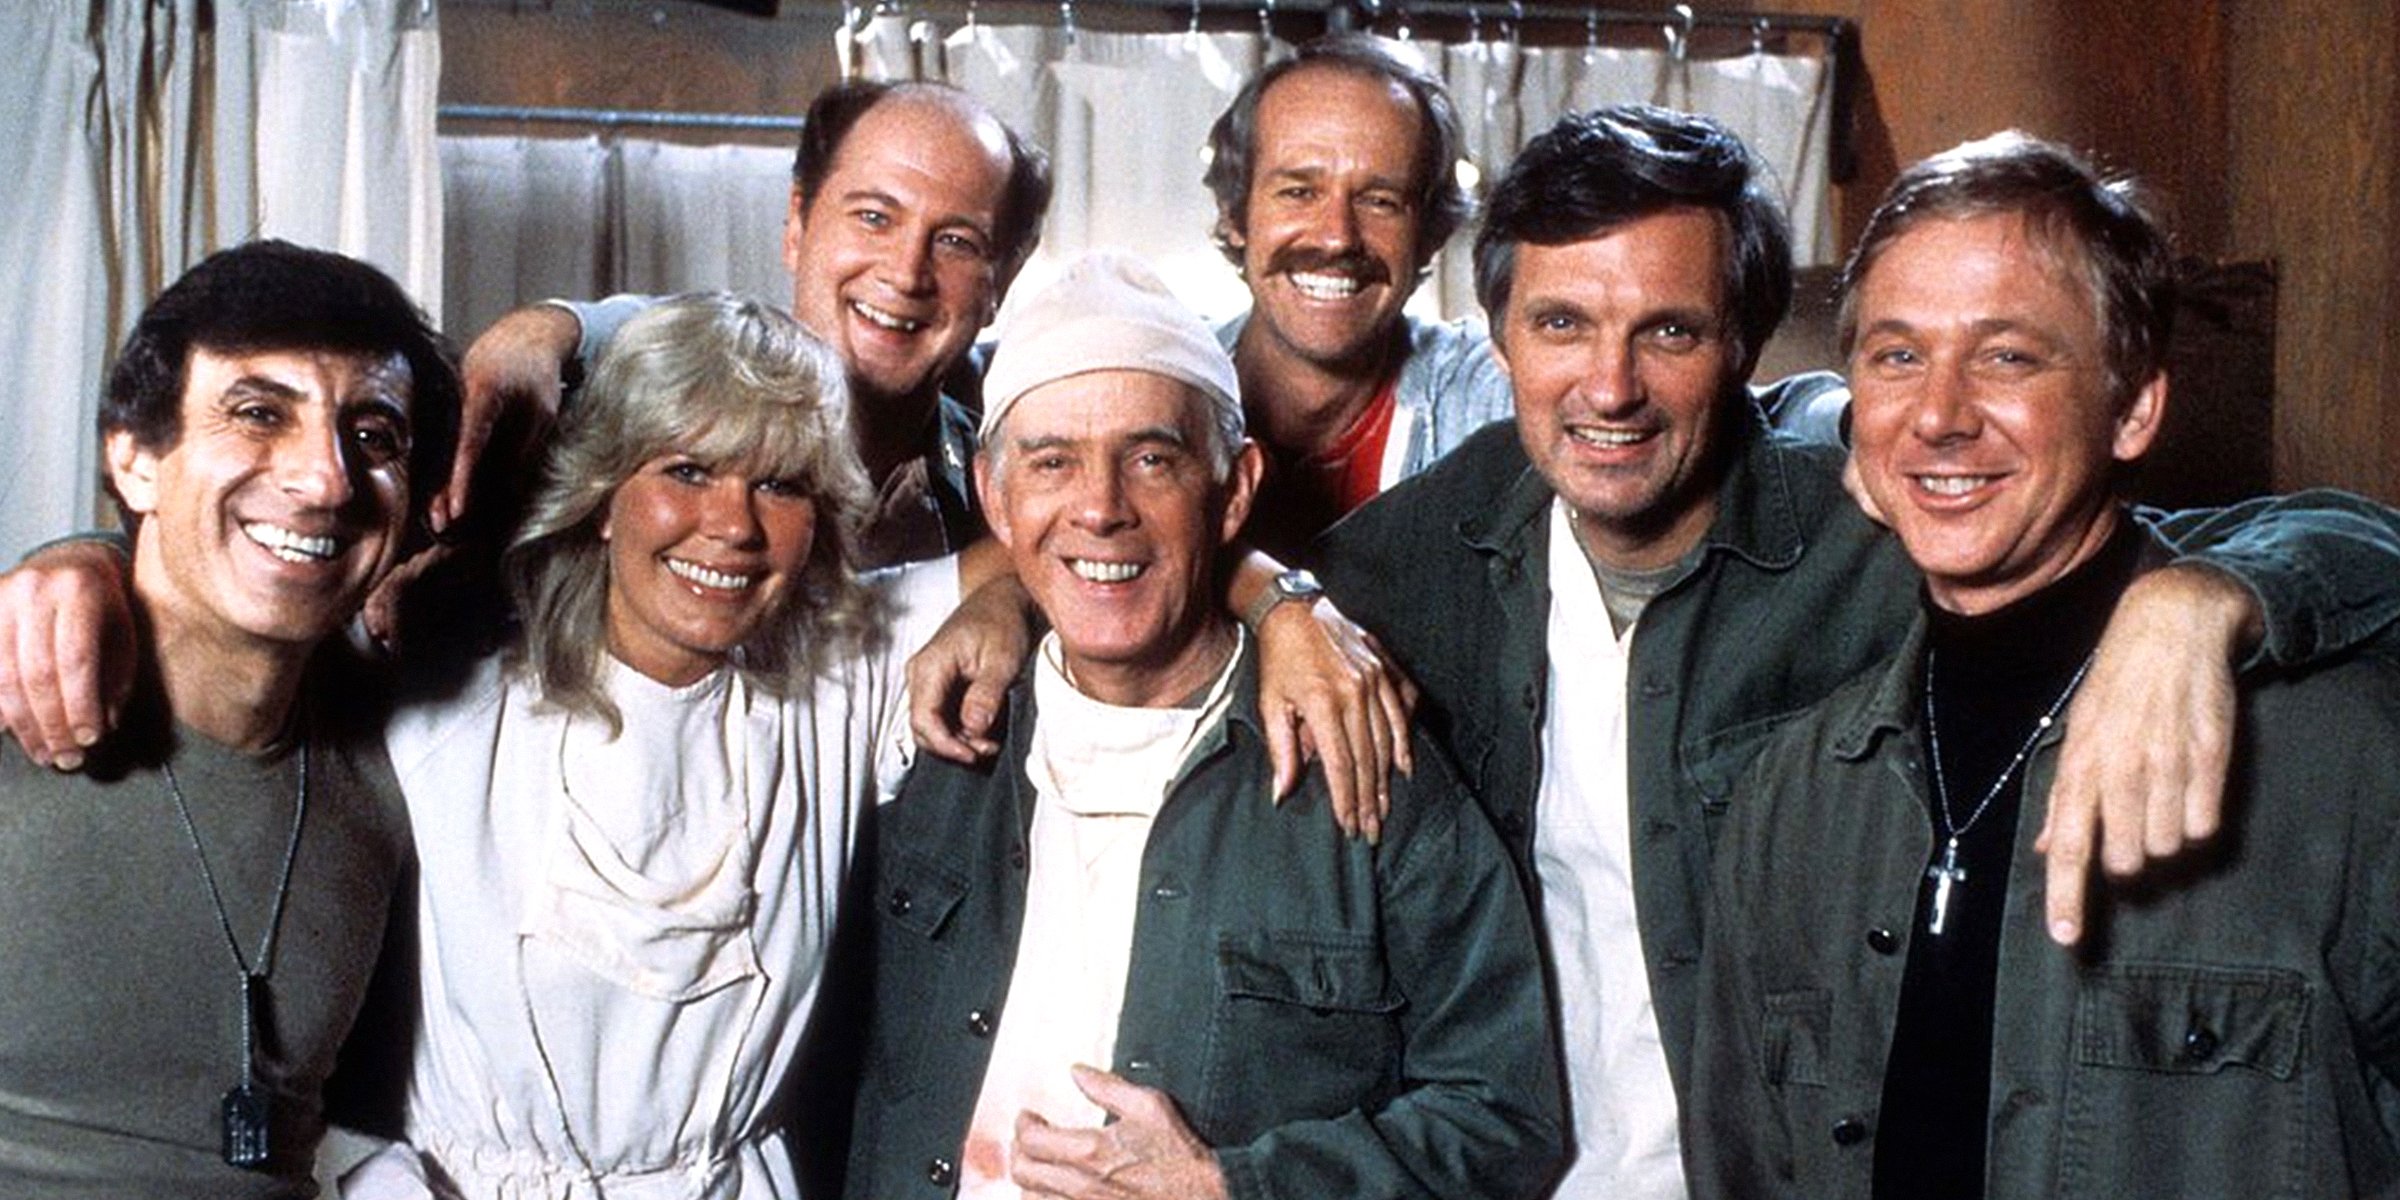 The cast of TV series "M*A*S*H." | Source: Getty Images